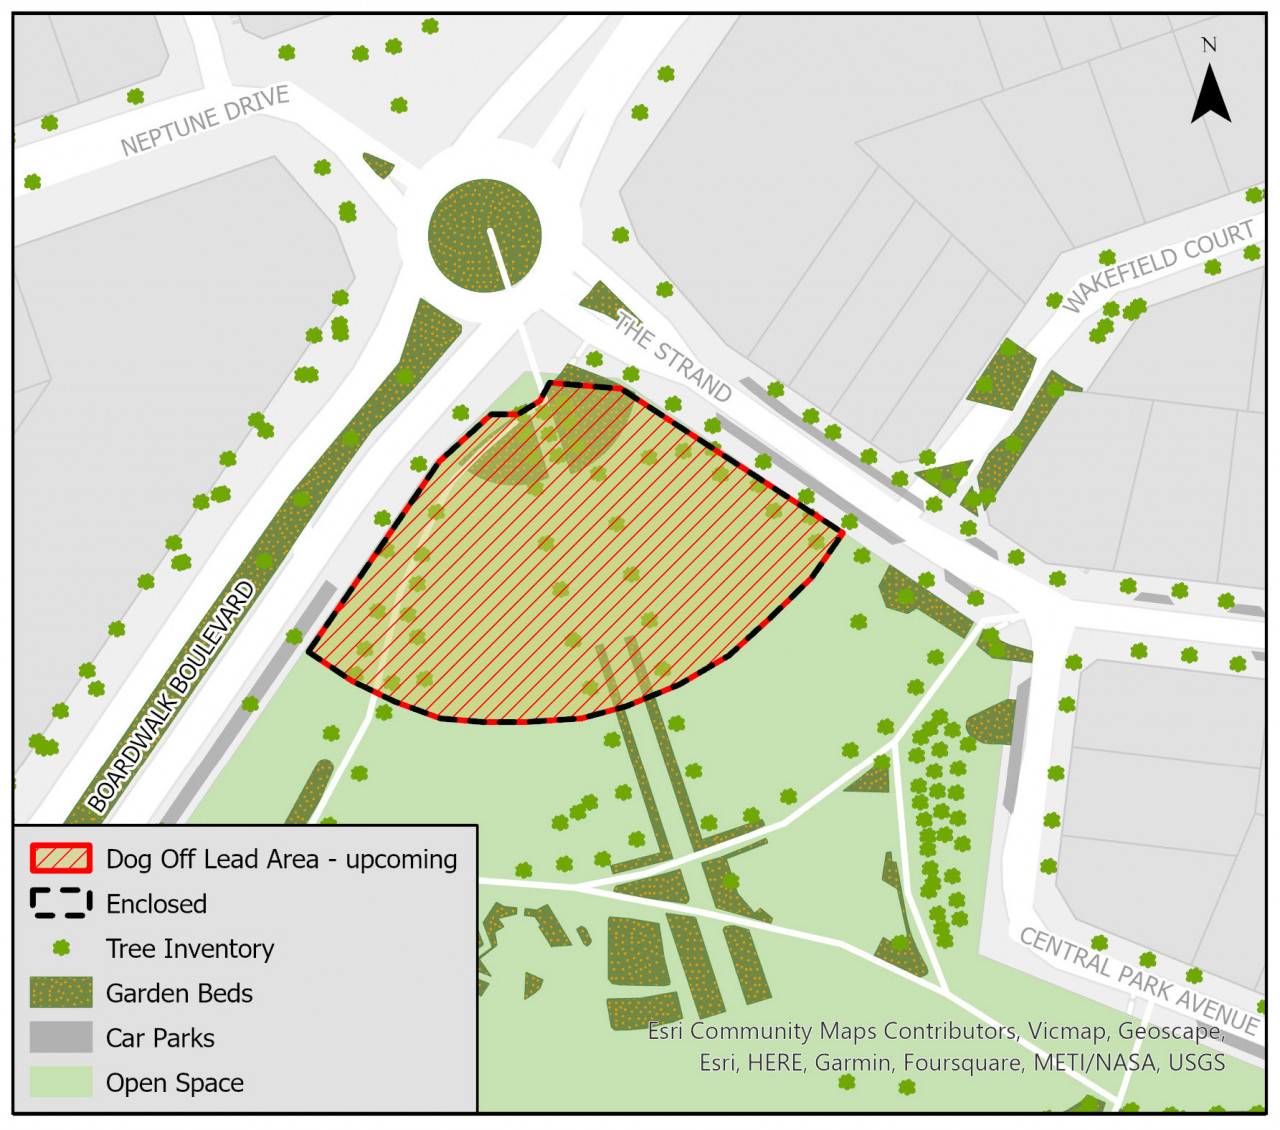 UPCOMING - The Strand Park (Enclosed Park)